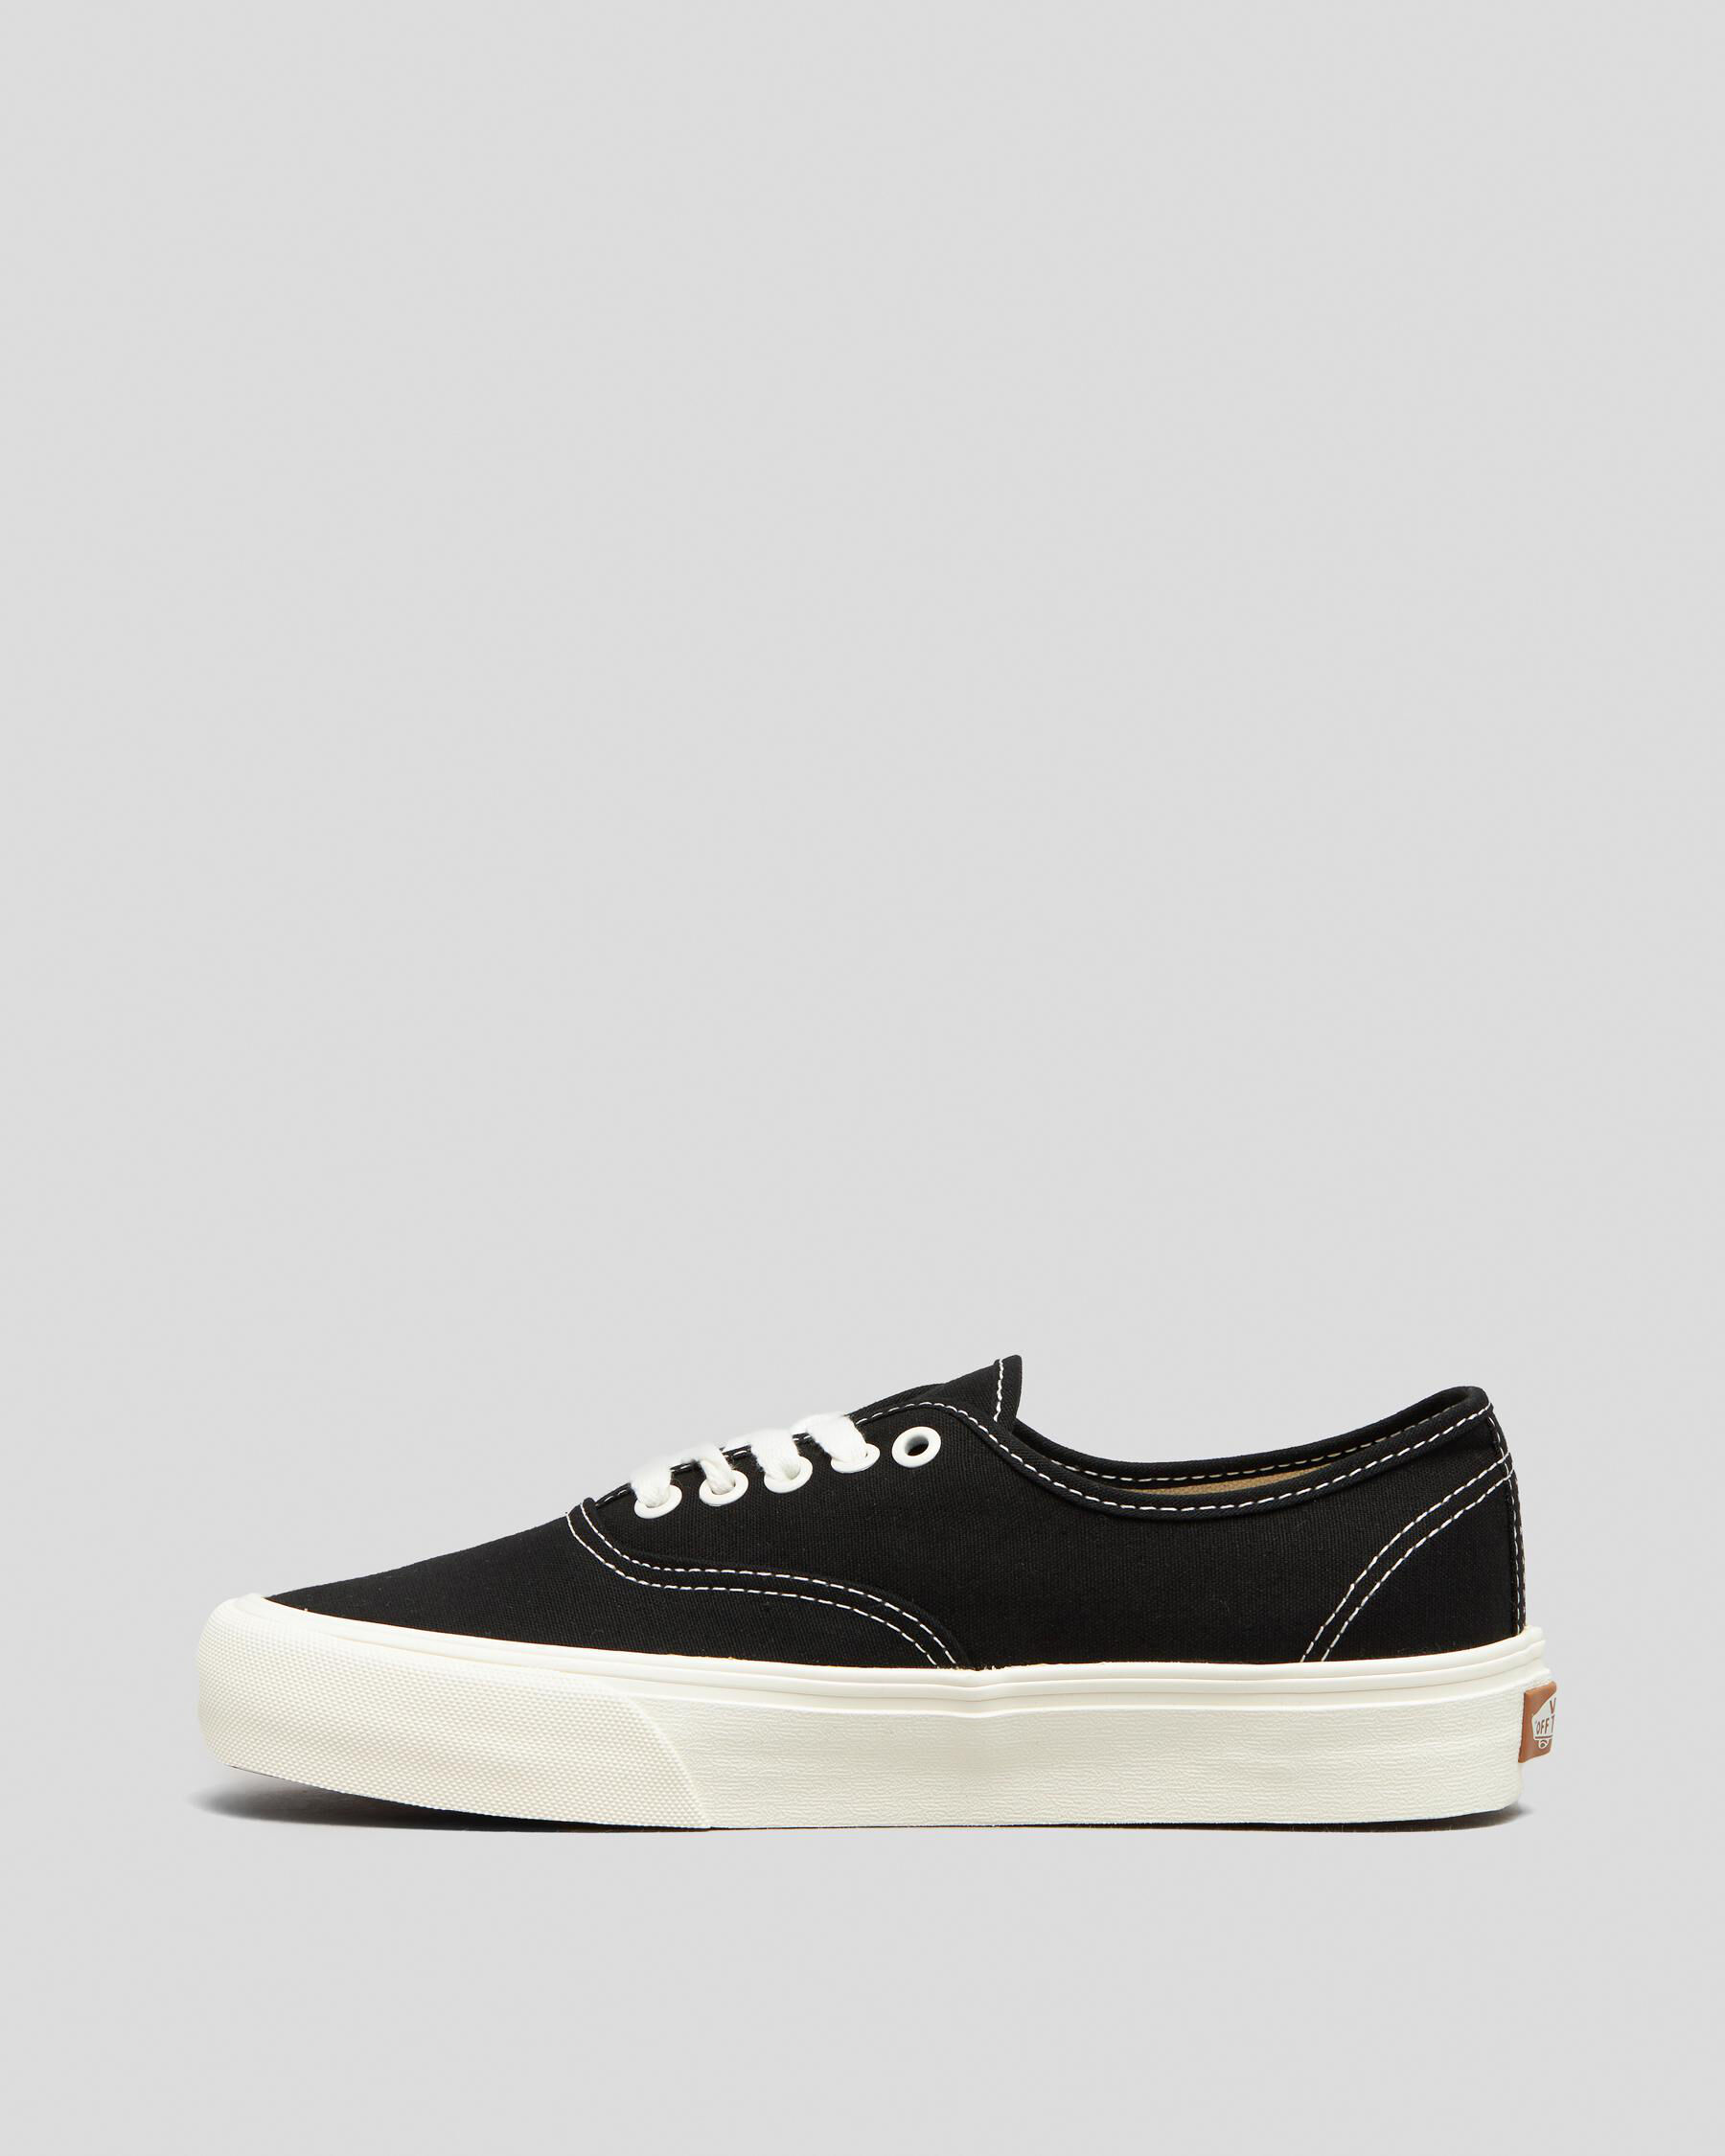 Vans Womens Authentic VR3 Shoes In Black/marshmallow - FREE